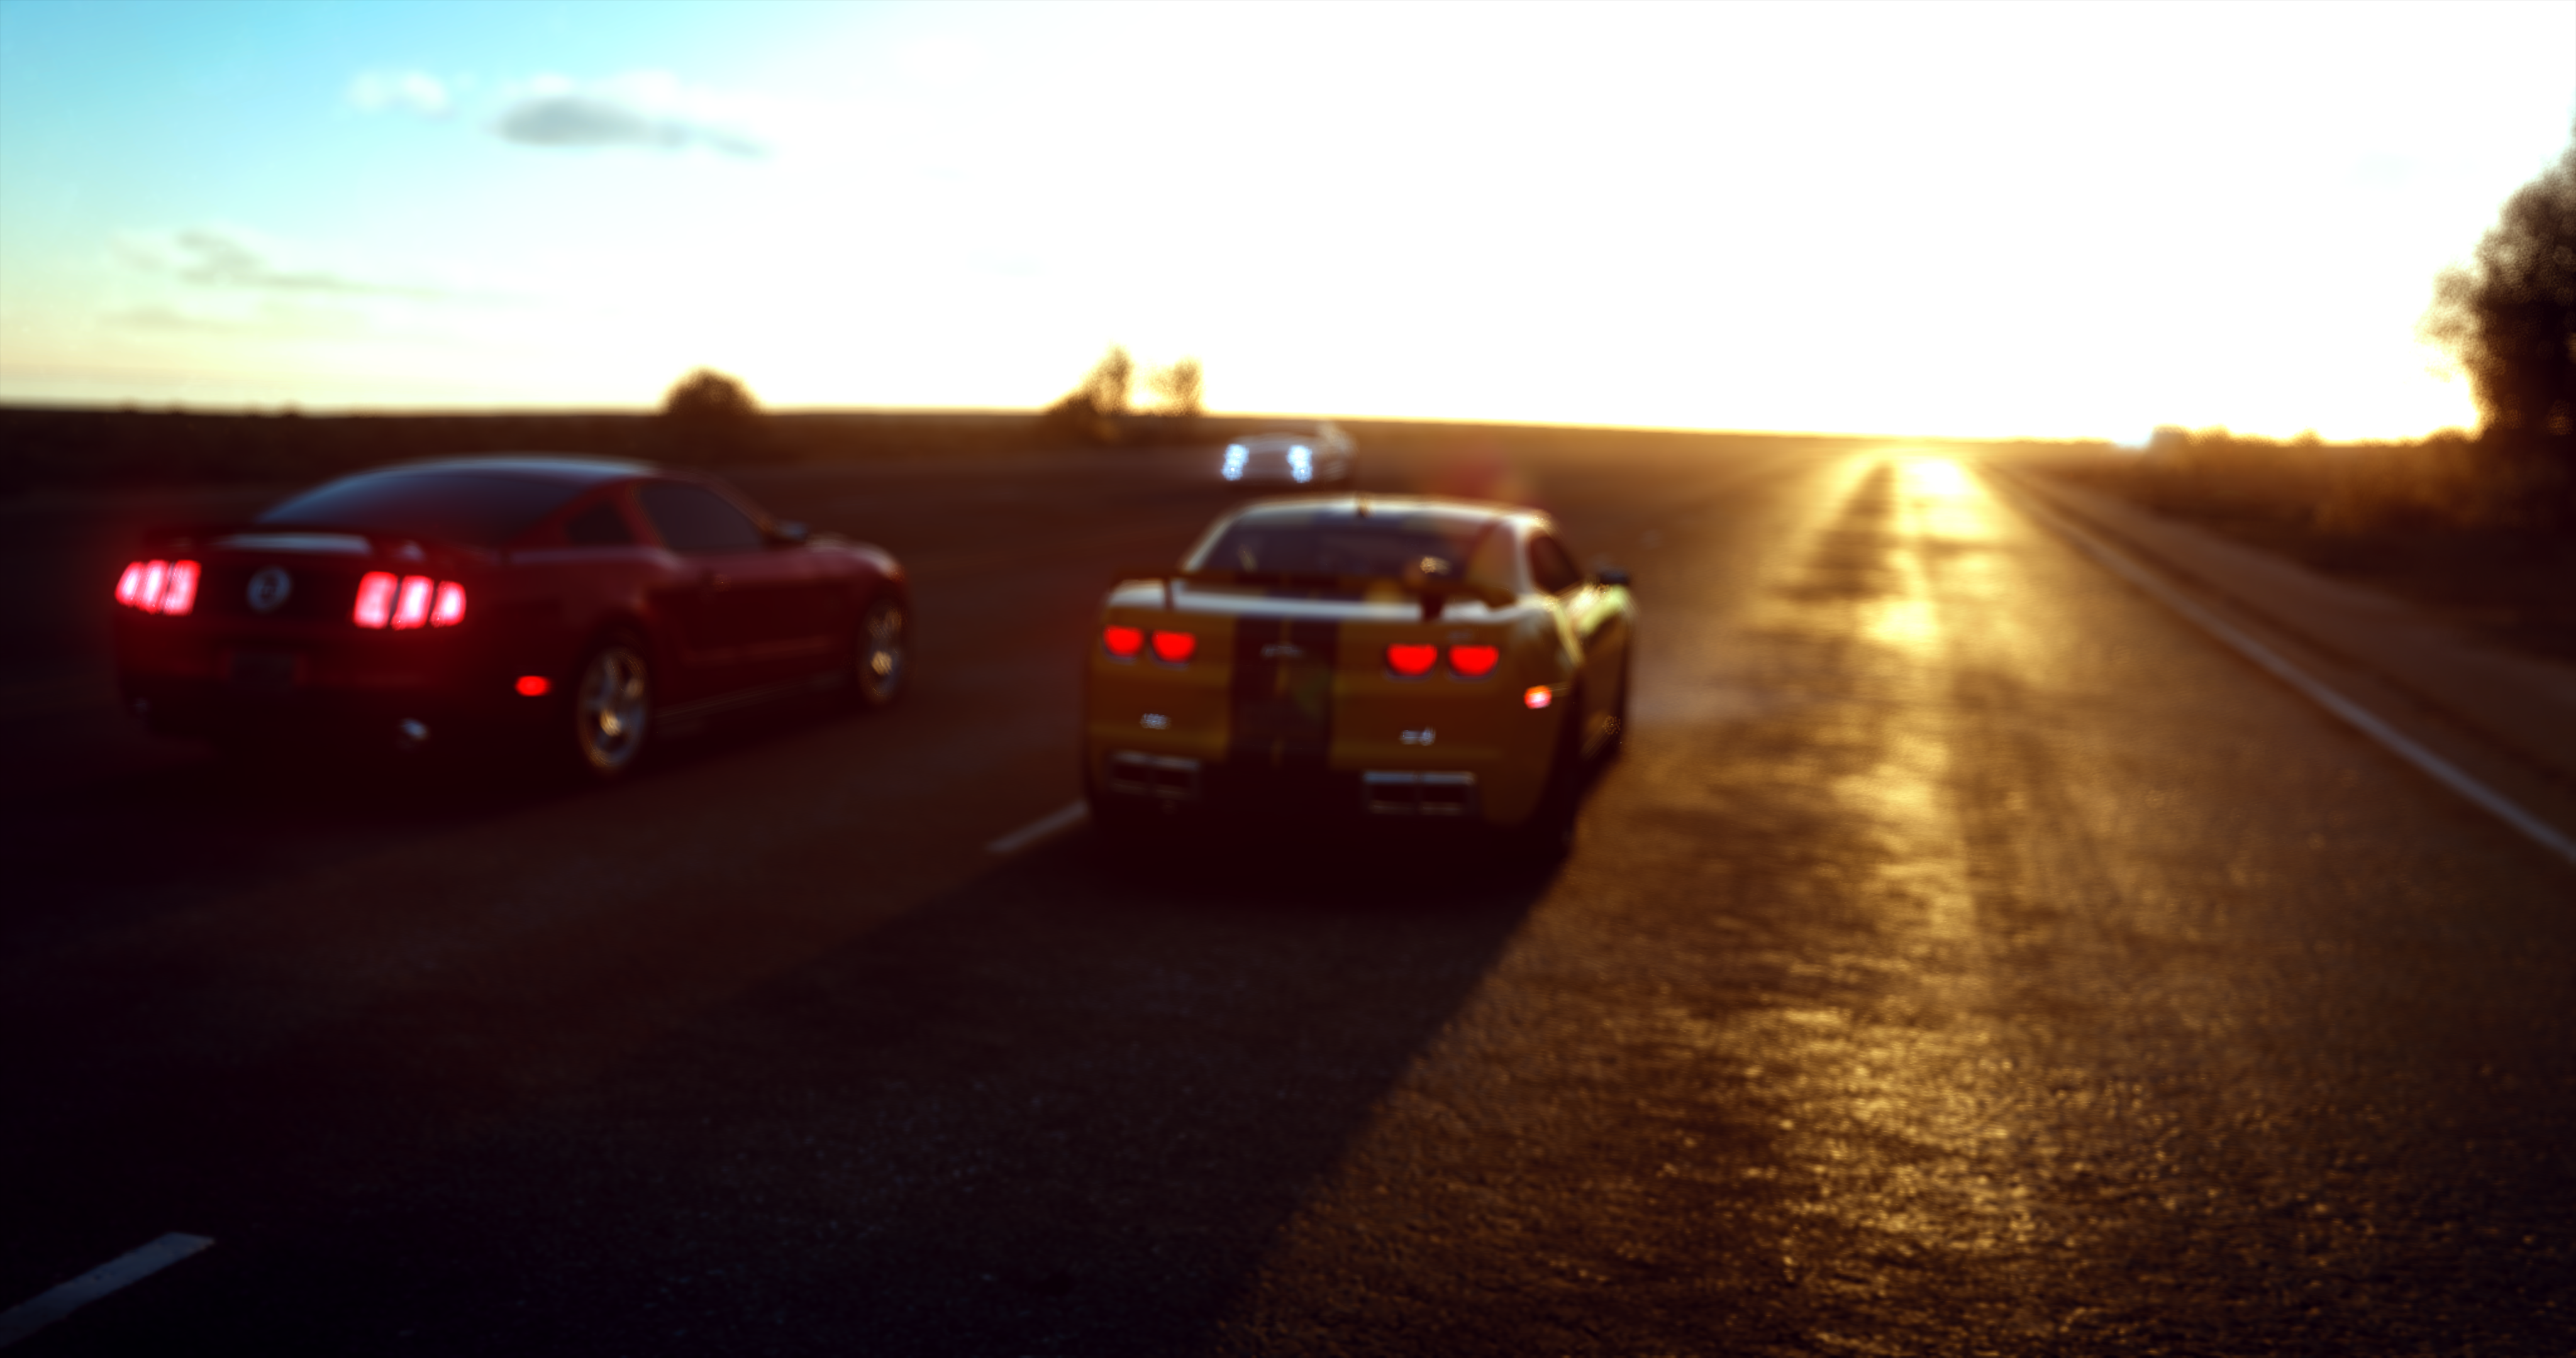 General 4096x2160 The Crew The Crew Wild Run road Chevrolet Camaro Ford Mustang Ford Mustang S-197 II car Ford video games screen shot PC gaming Chevrolet